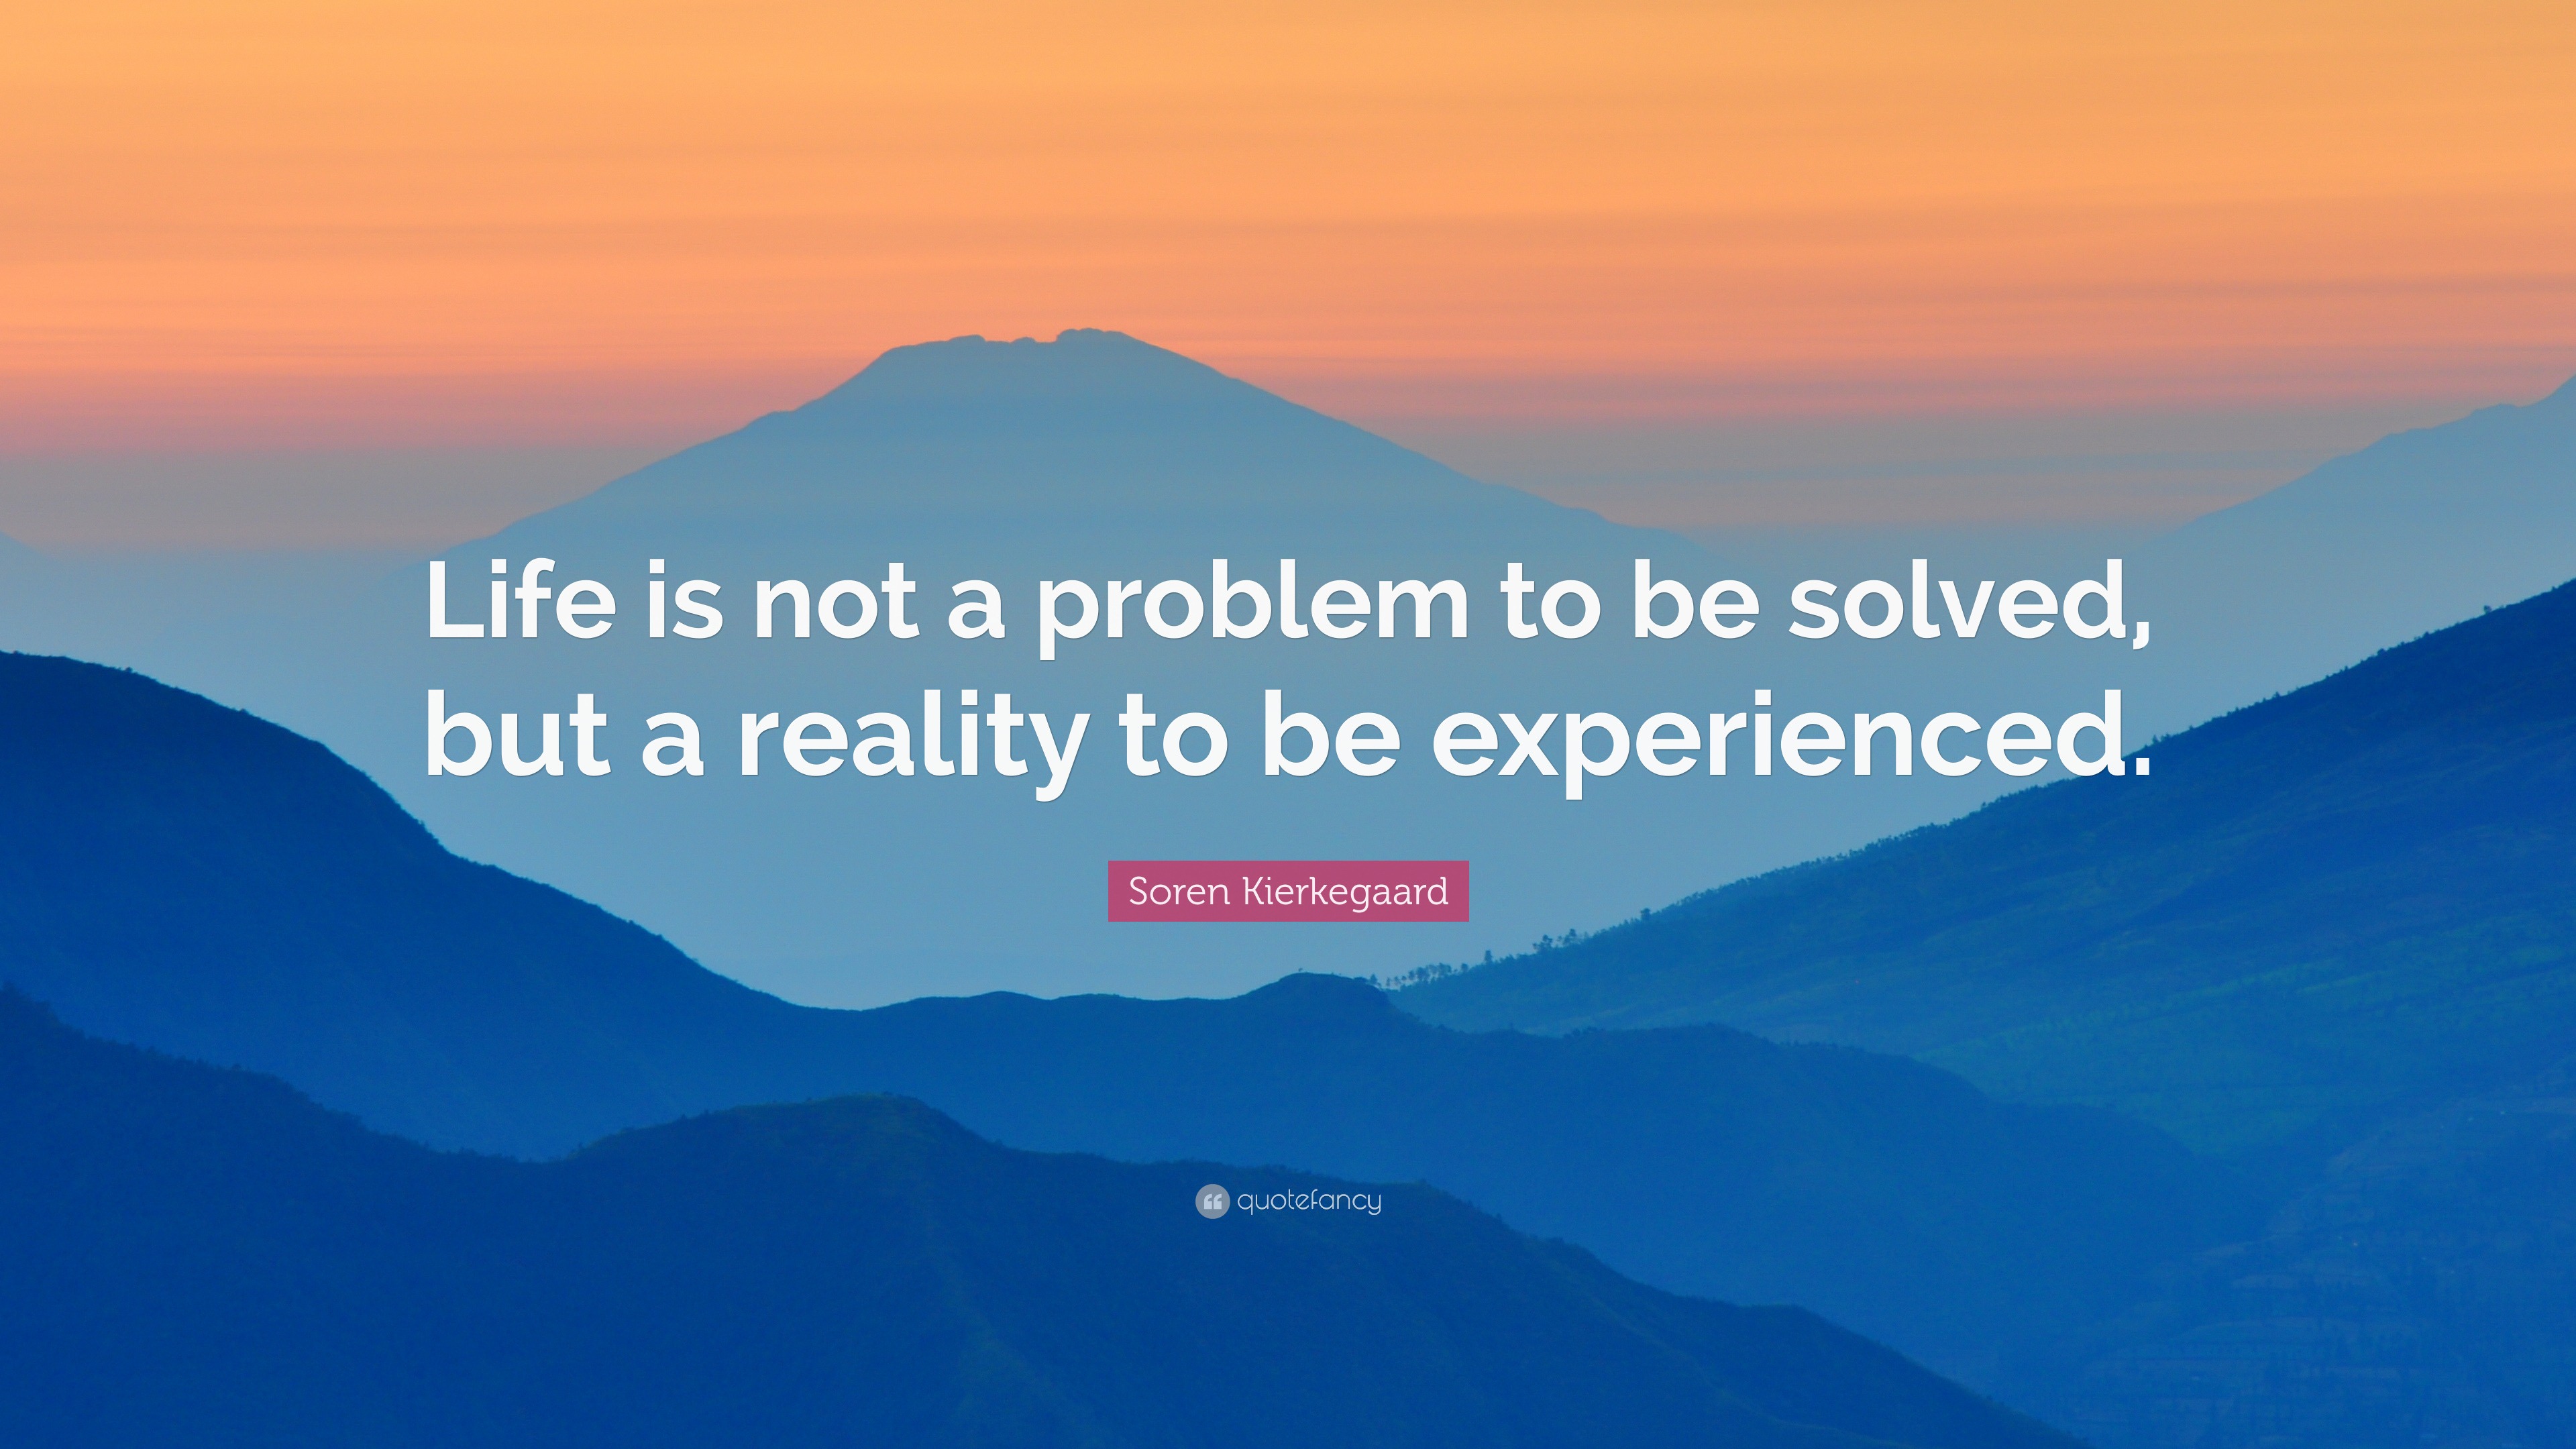 life is not a problem to be solved quotes